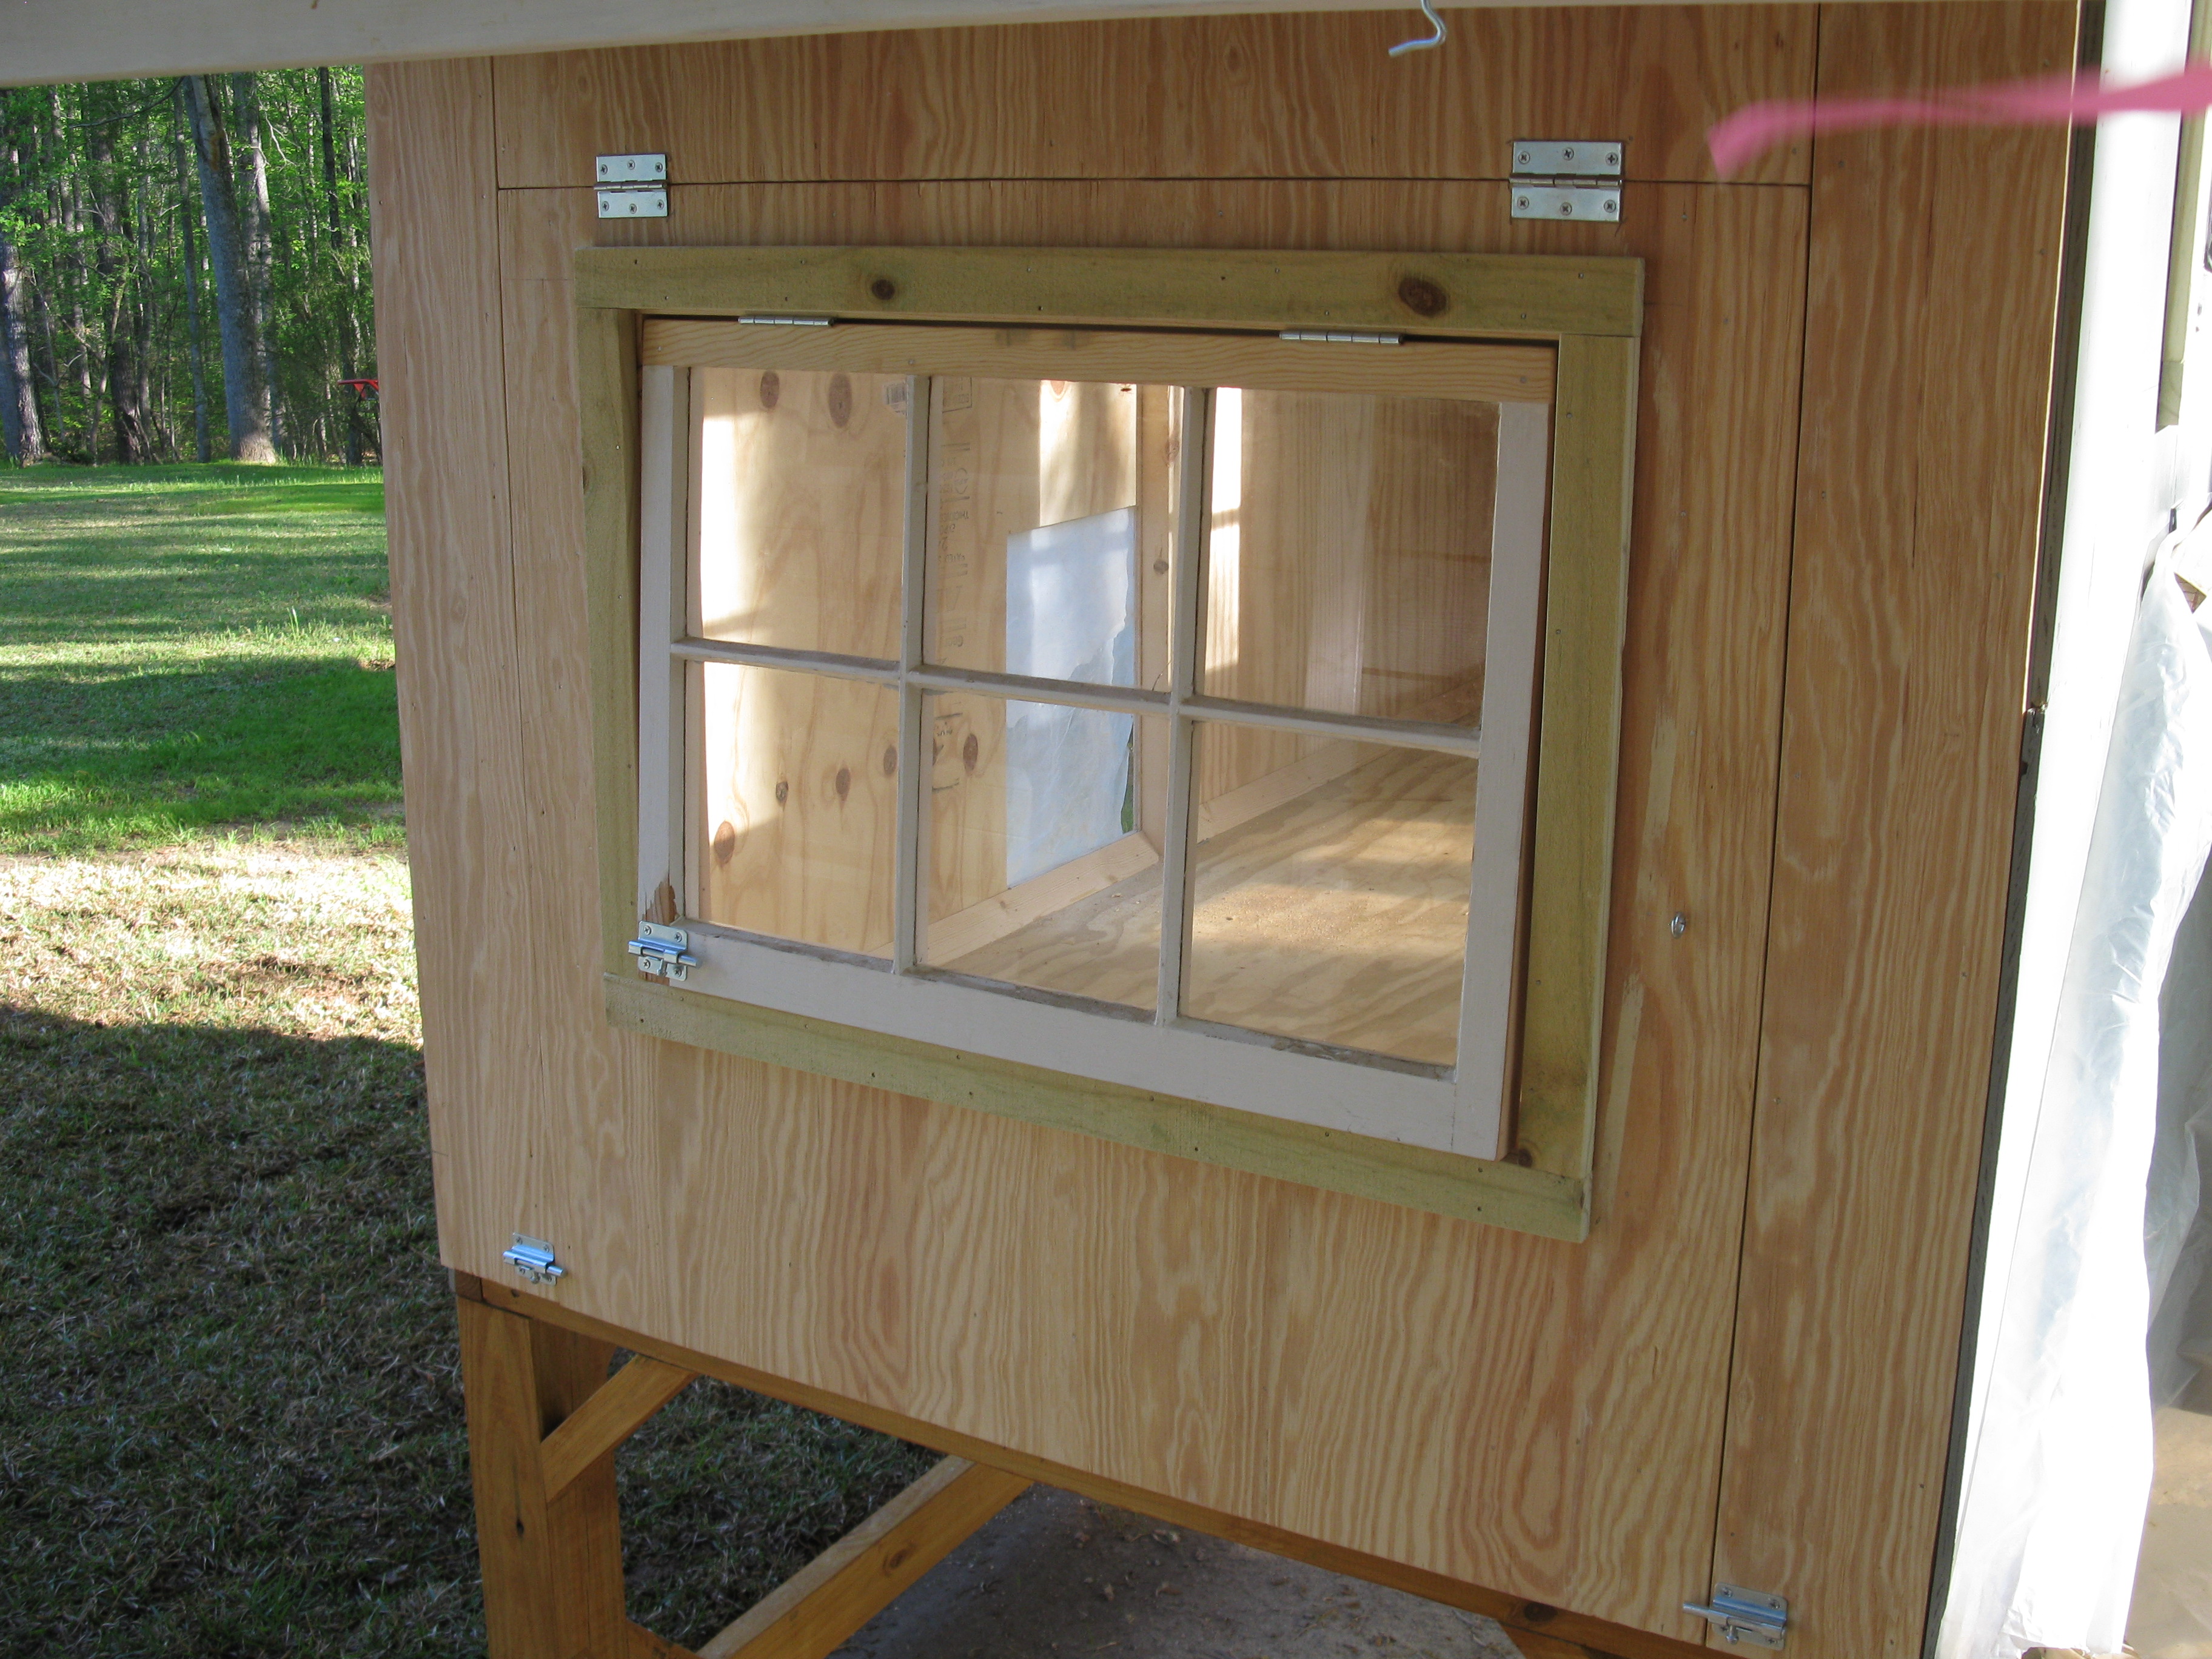 One end has a full width hatch door for easy cleaning and the window sash is also hinged.